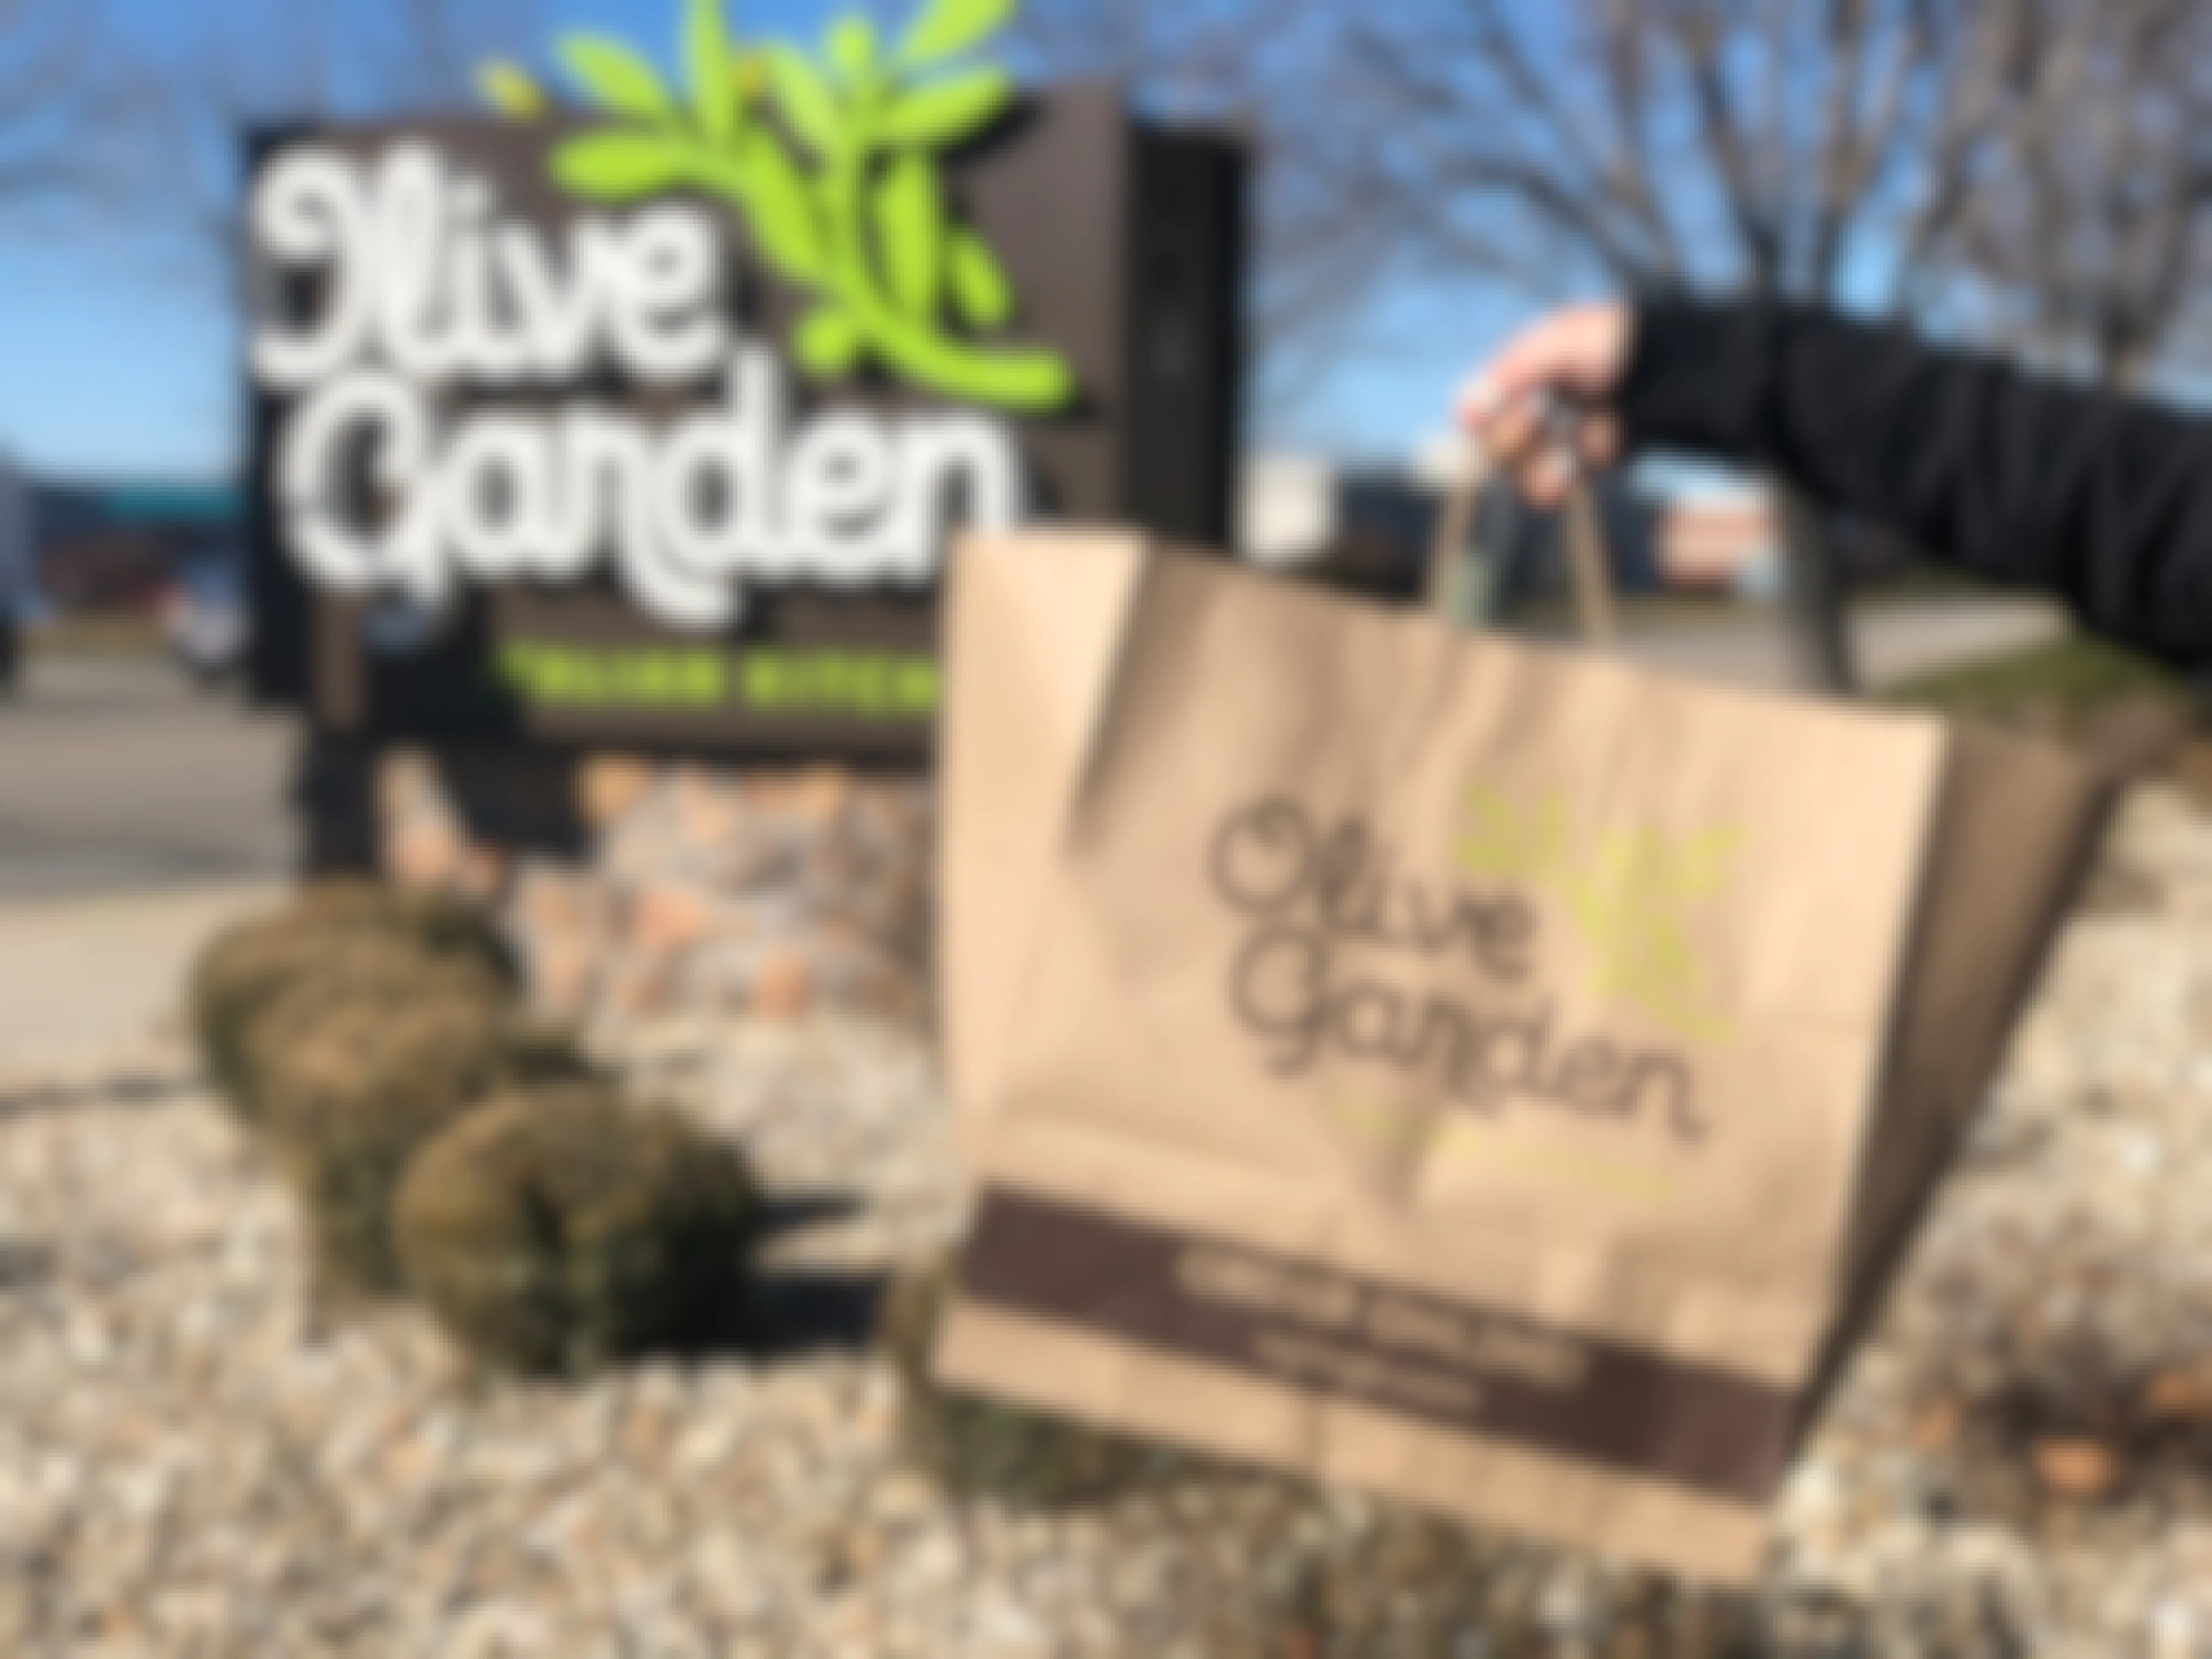 Someone holding an Olive Garden to go bag in front of an Olive Garden sign